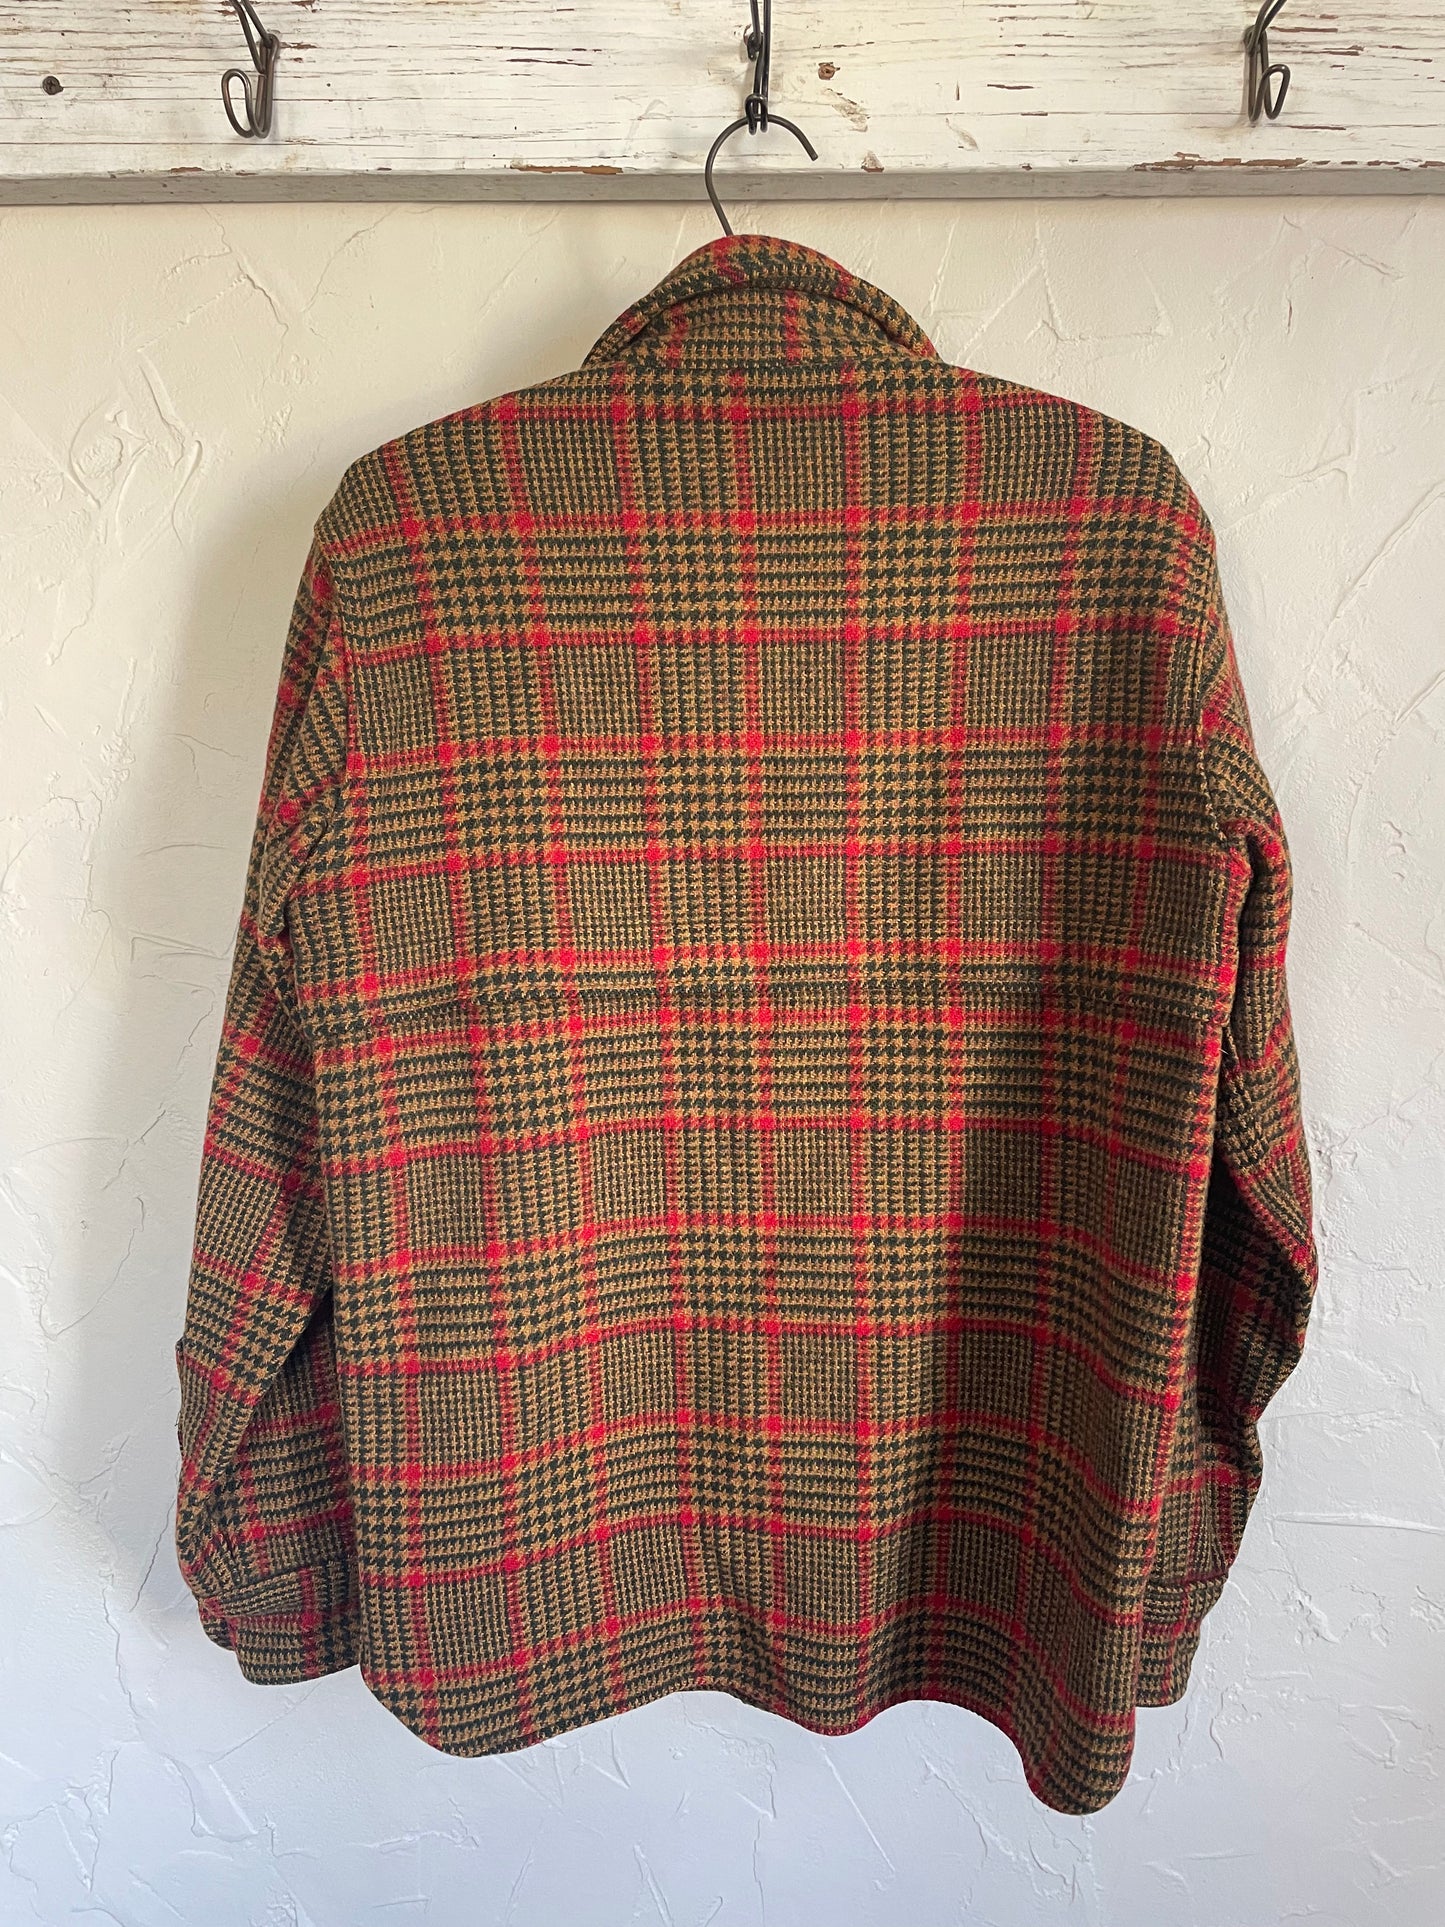 80s Houndstooth Plaid Woolrich Shirt Jacket